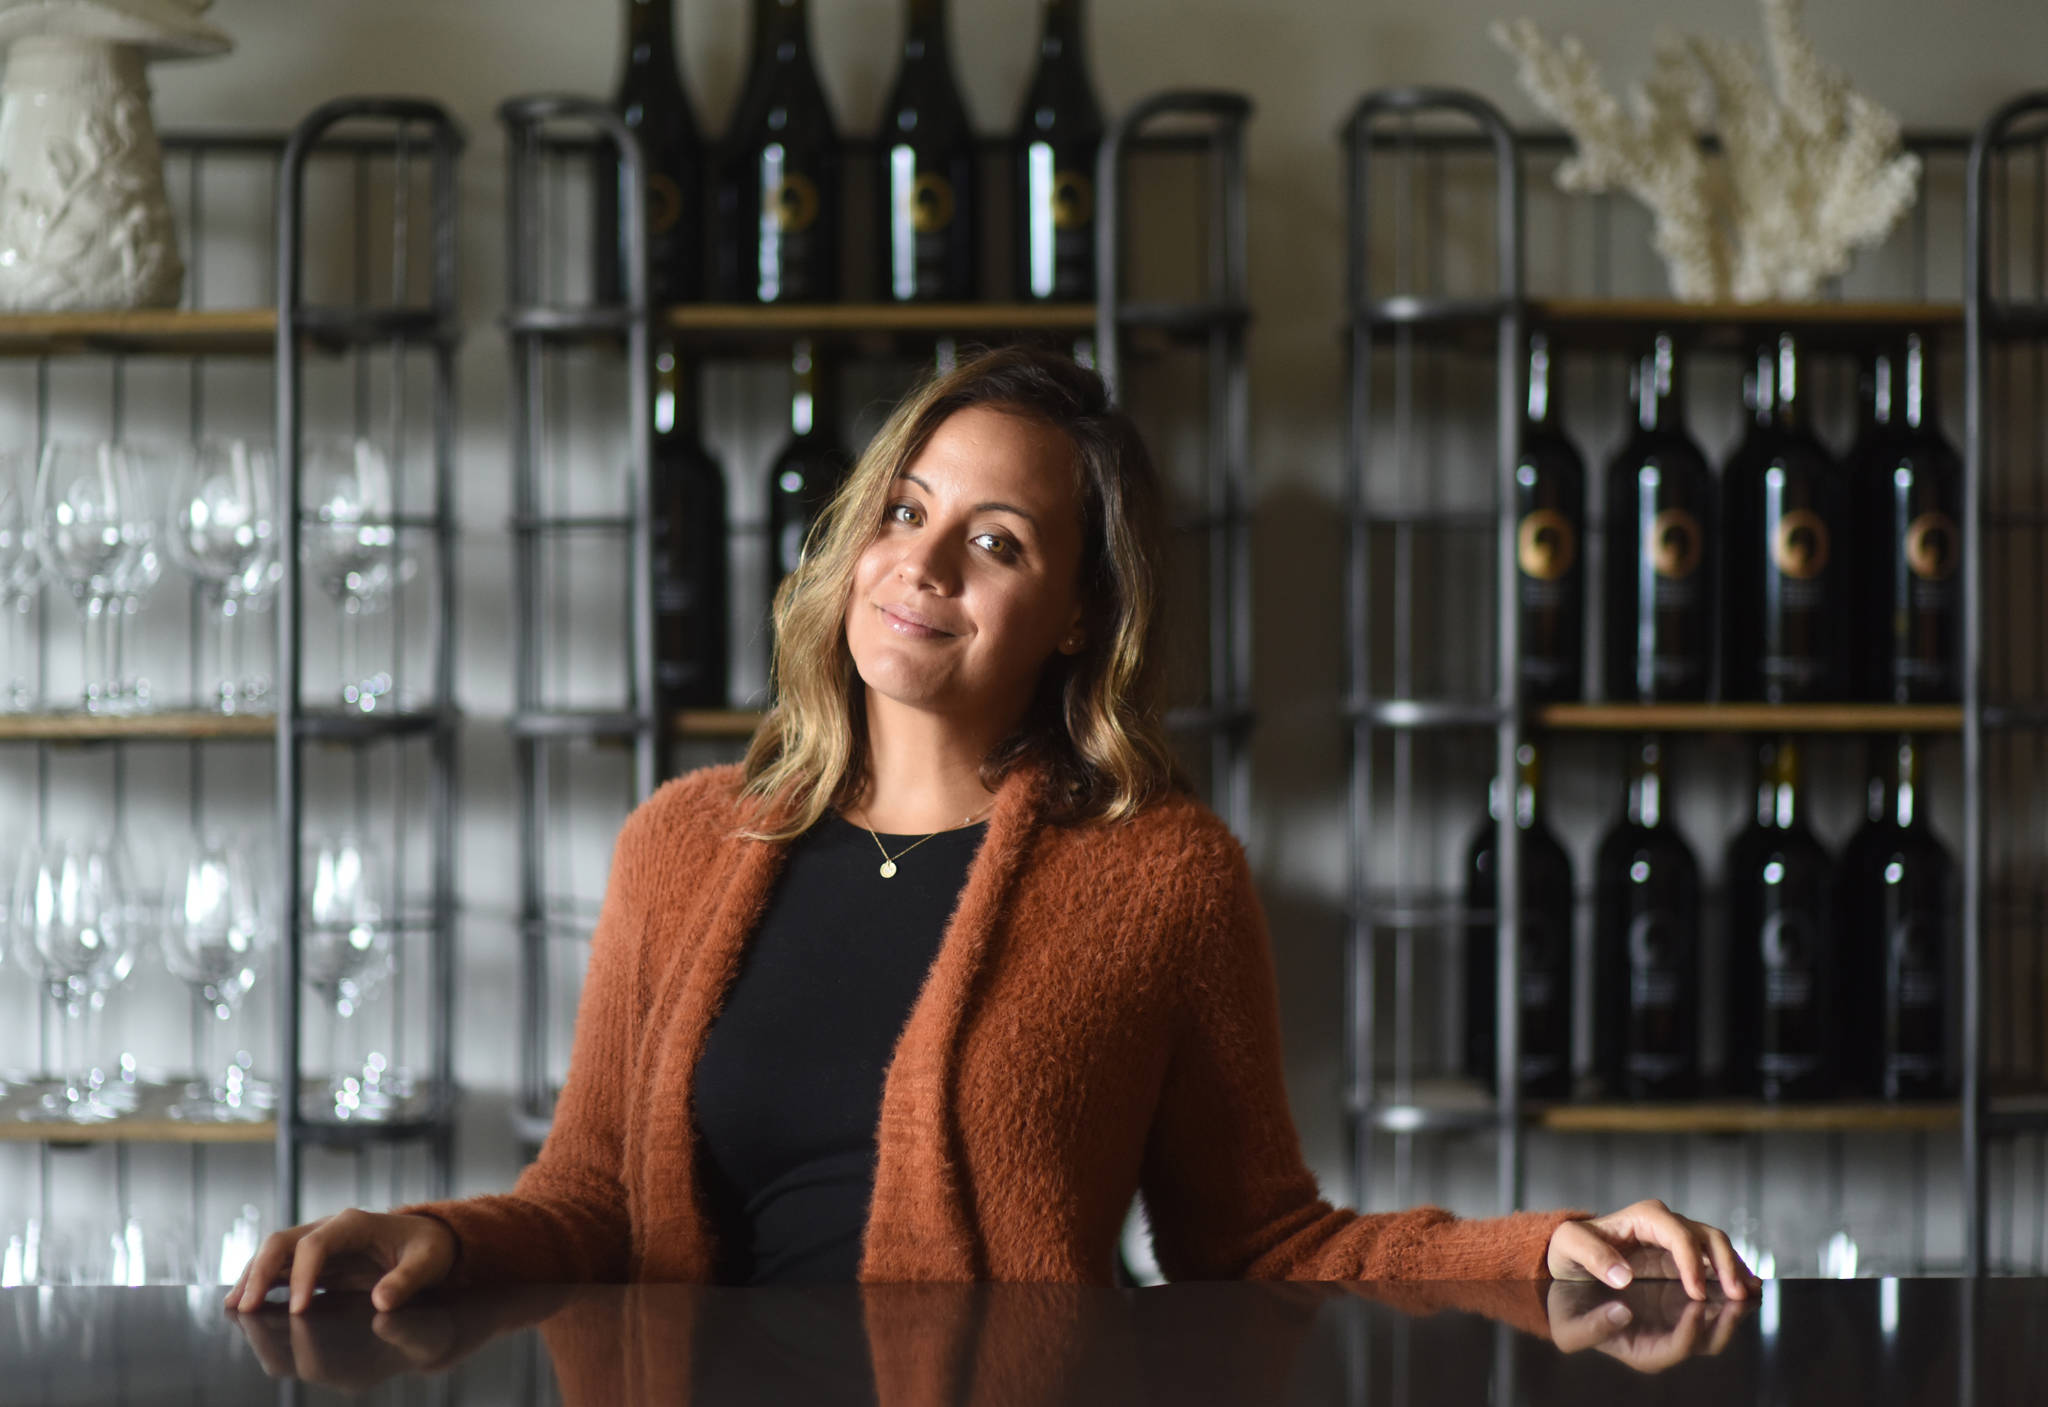 Building a home with wine and community | Women in Business profile